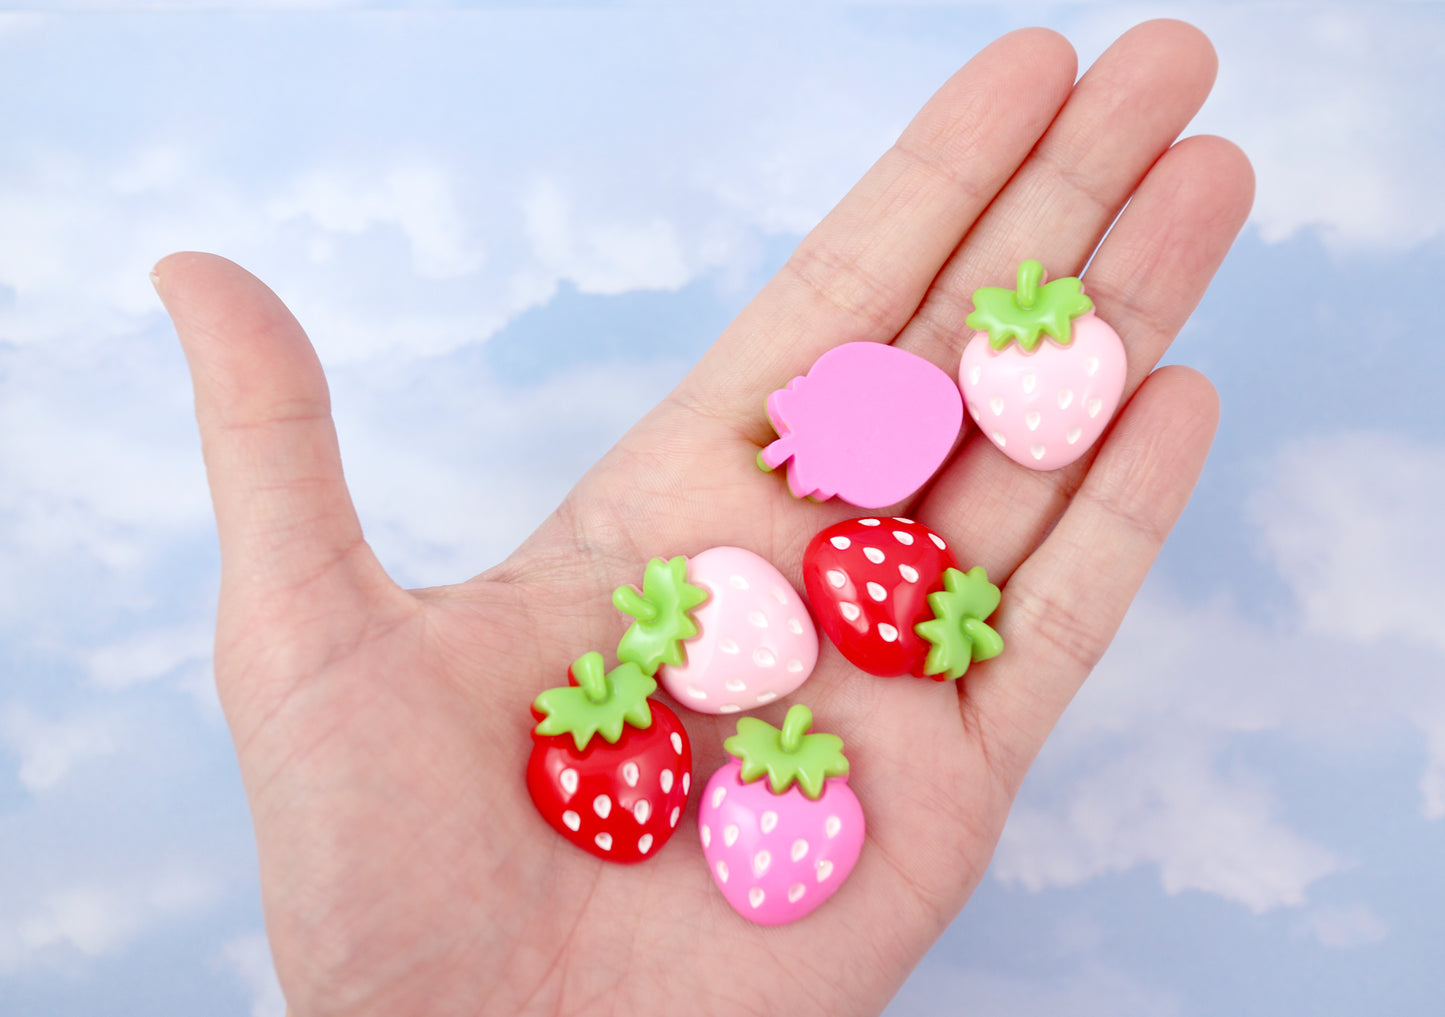 Strawberry Cabochons - 27mm Cute Chunky Strawberry Mix Acrylic or Resin Flatback Cabochons - 6 pc set